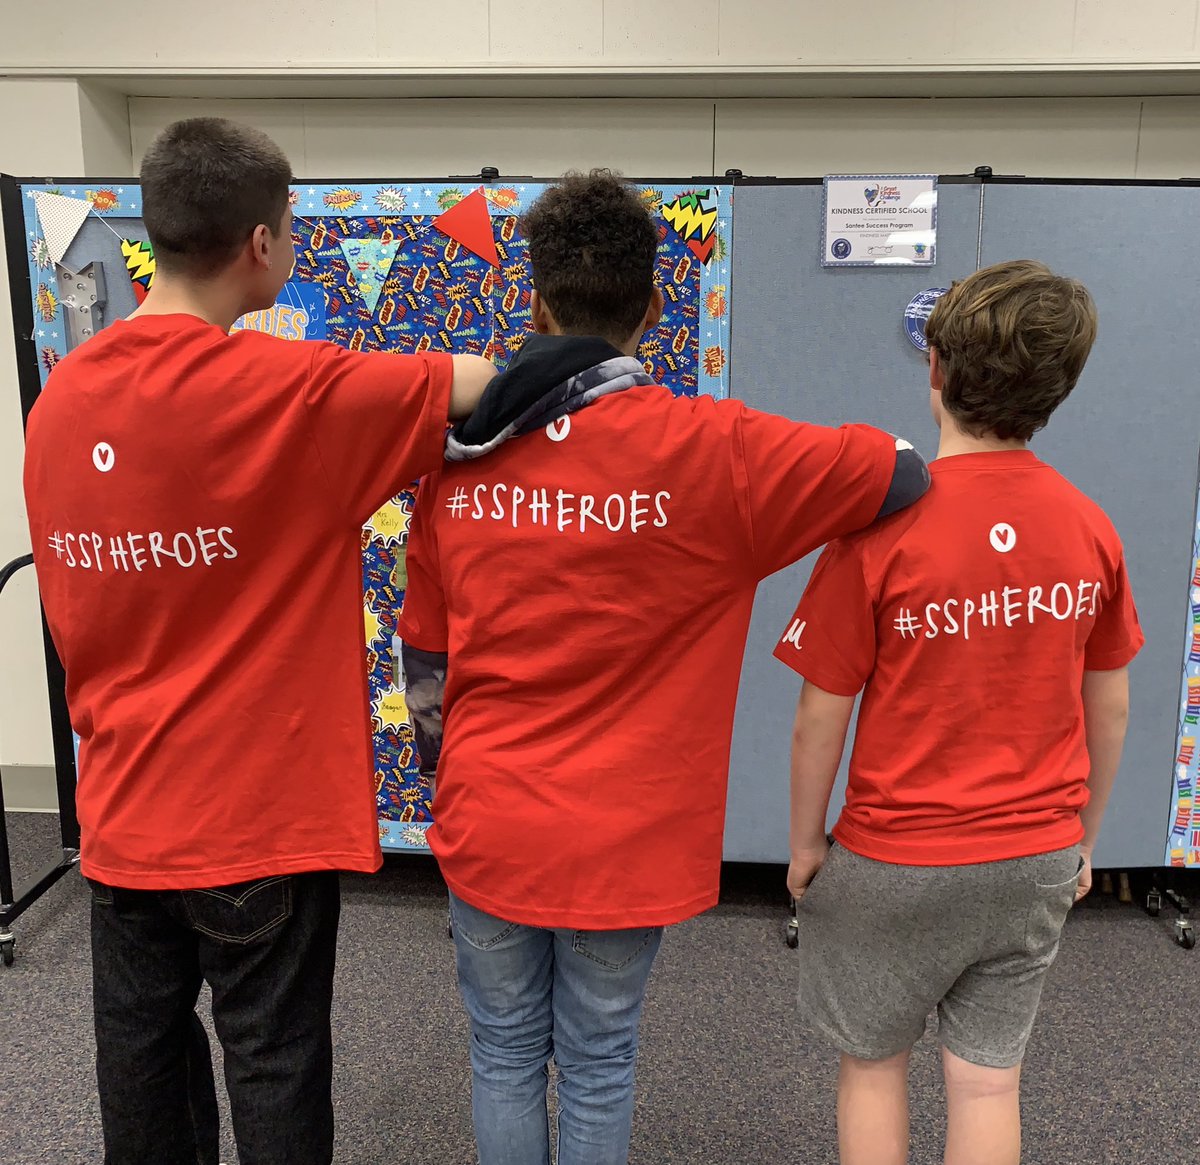 It's that time of year again. #sspHeroes are fundraising #Pennies4Patients. We kicked today off with our matching t's. Any spare change helps! @EdGigliotti @SSDKristin @drsmpierce #santeesd #ssdchat.                    events.lls.org/pages/sd/Sante…